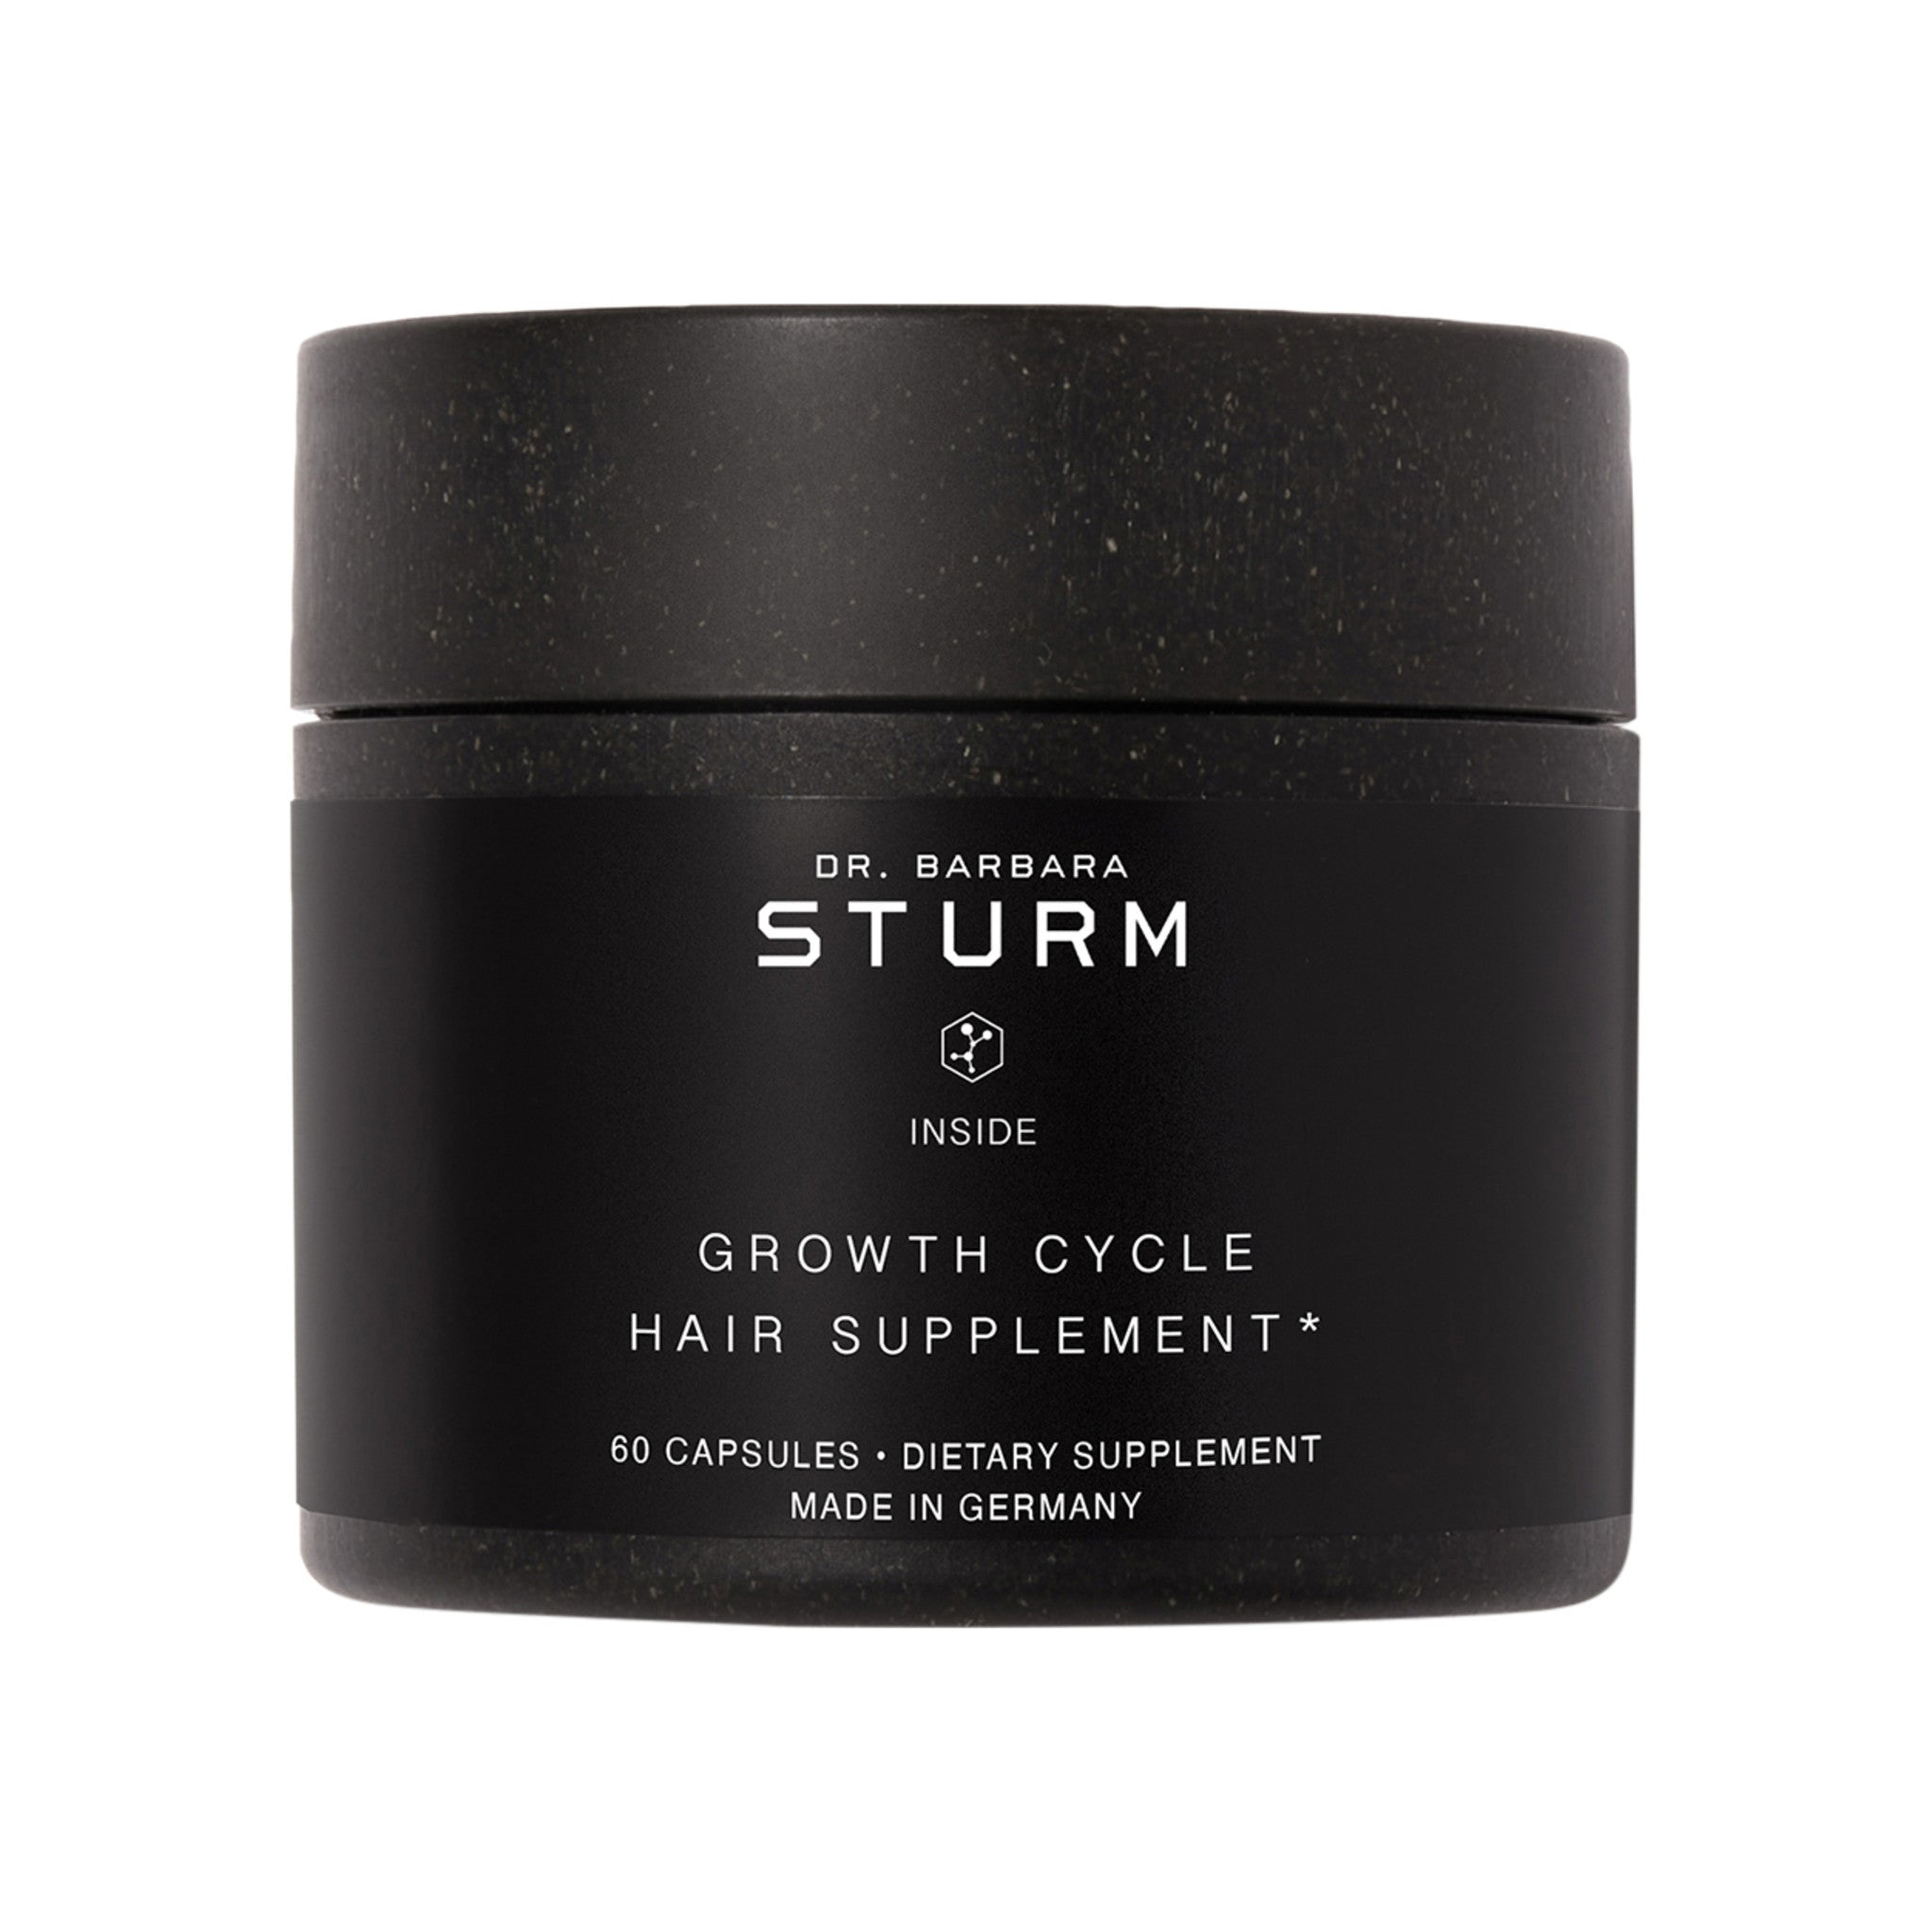 Growth Cycle Hair Supplement main image.